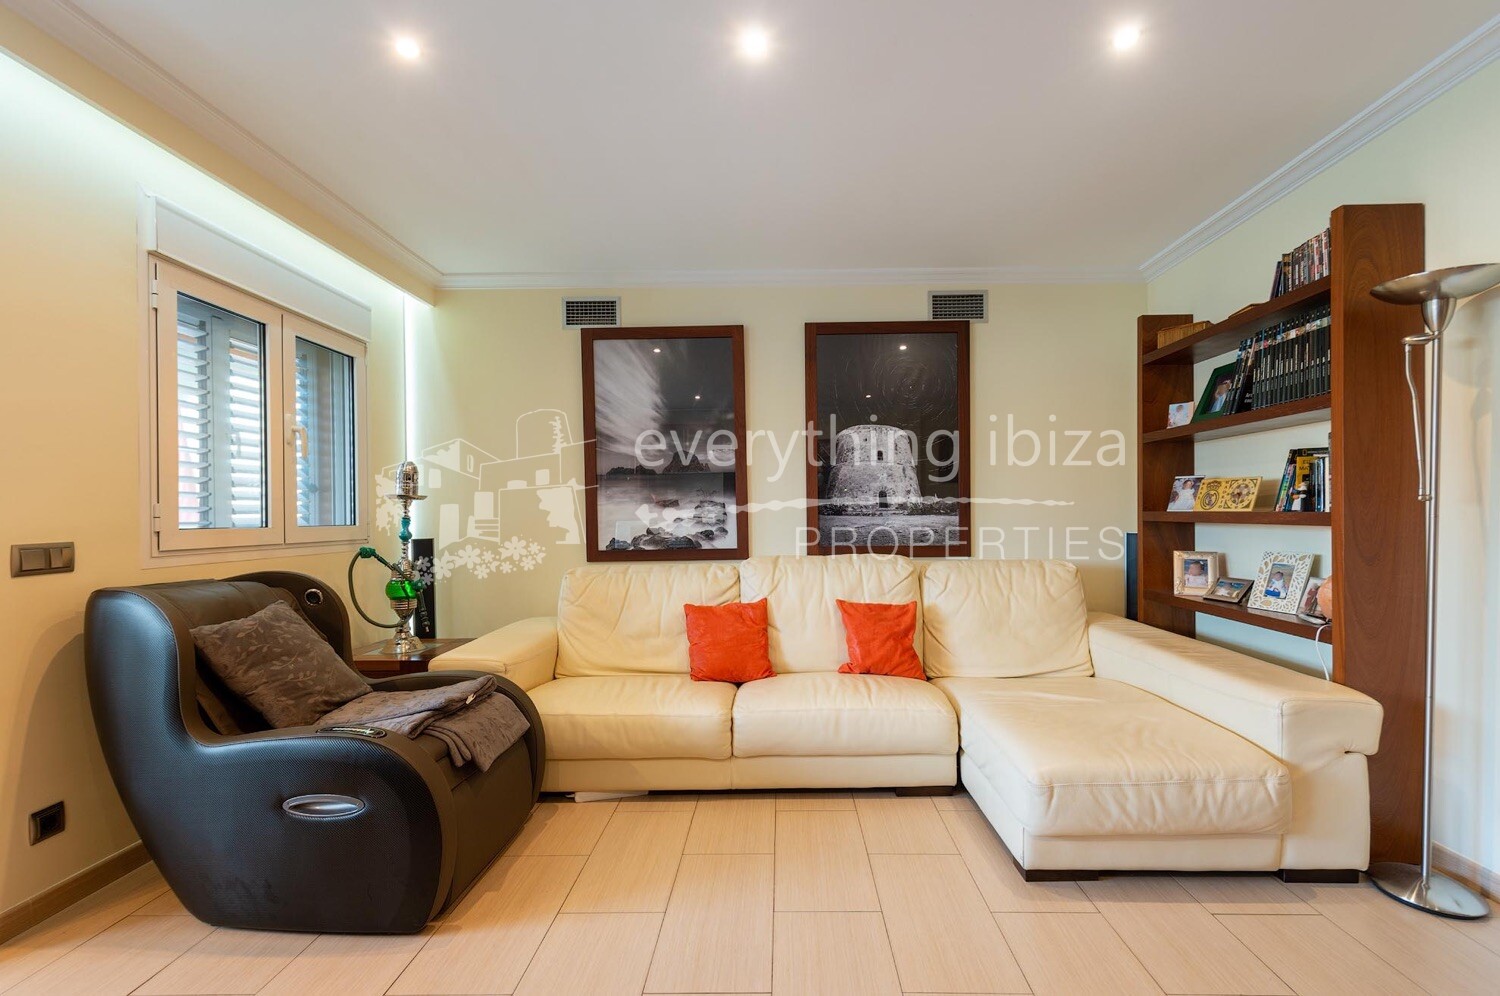 Renovated Apartment of Quality in Super Location, ref. 1418, for sale in Ibiza by everything ibiza Properties